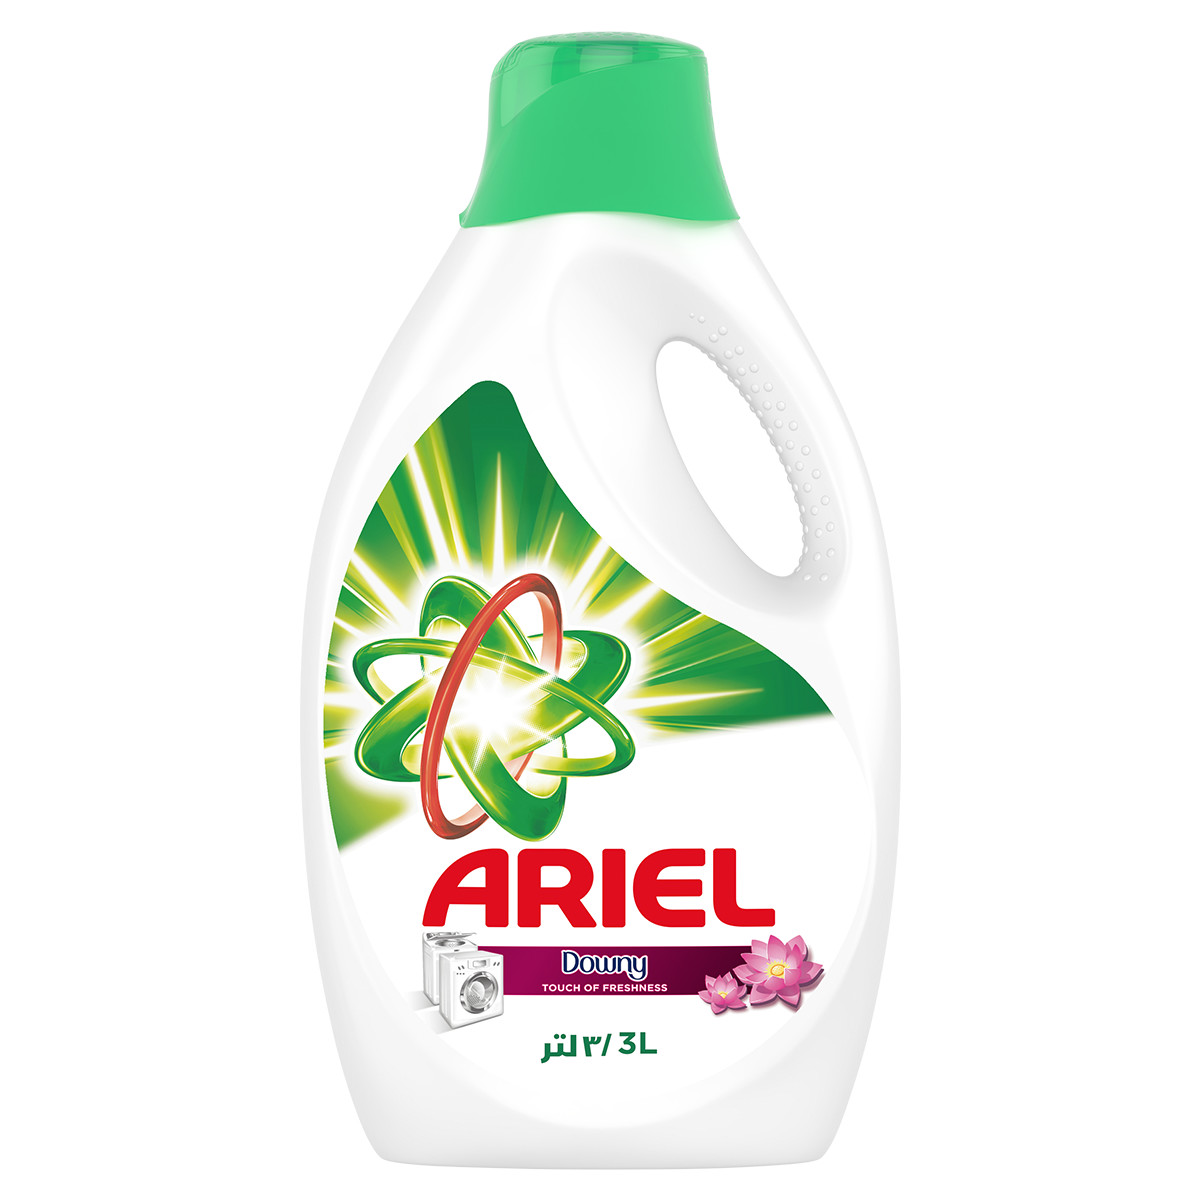 Ariel Automatic Washing Power Gel Laundry Detergent Touch of Freshness Downy